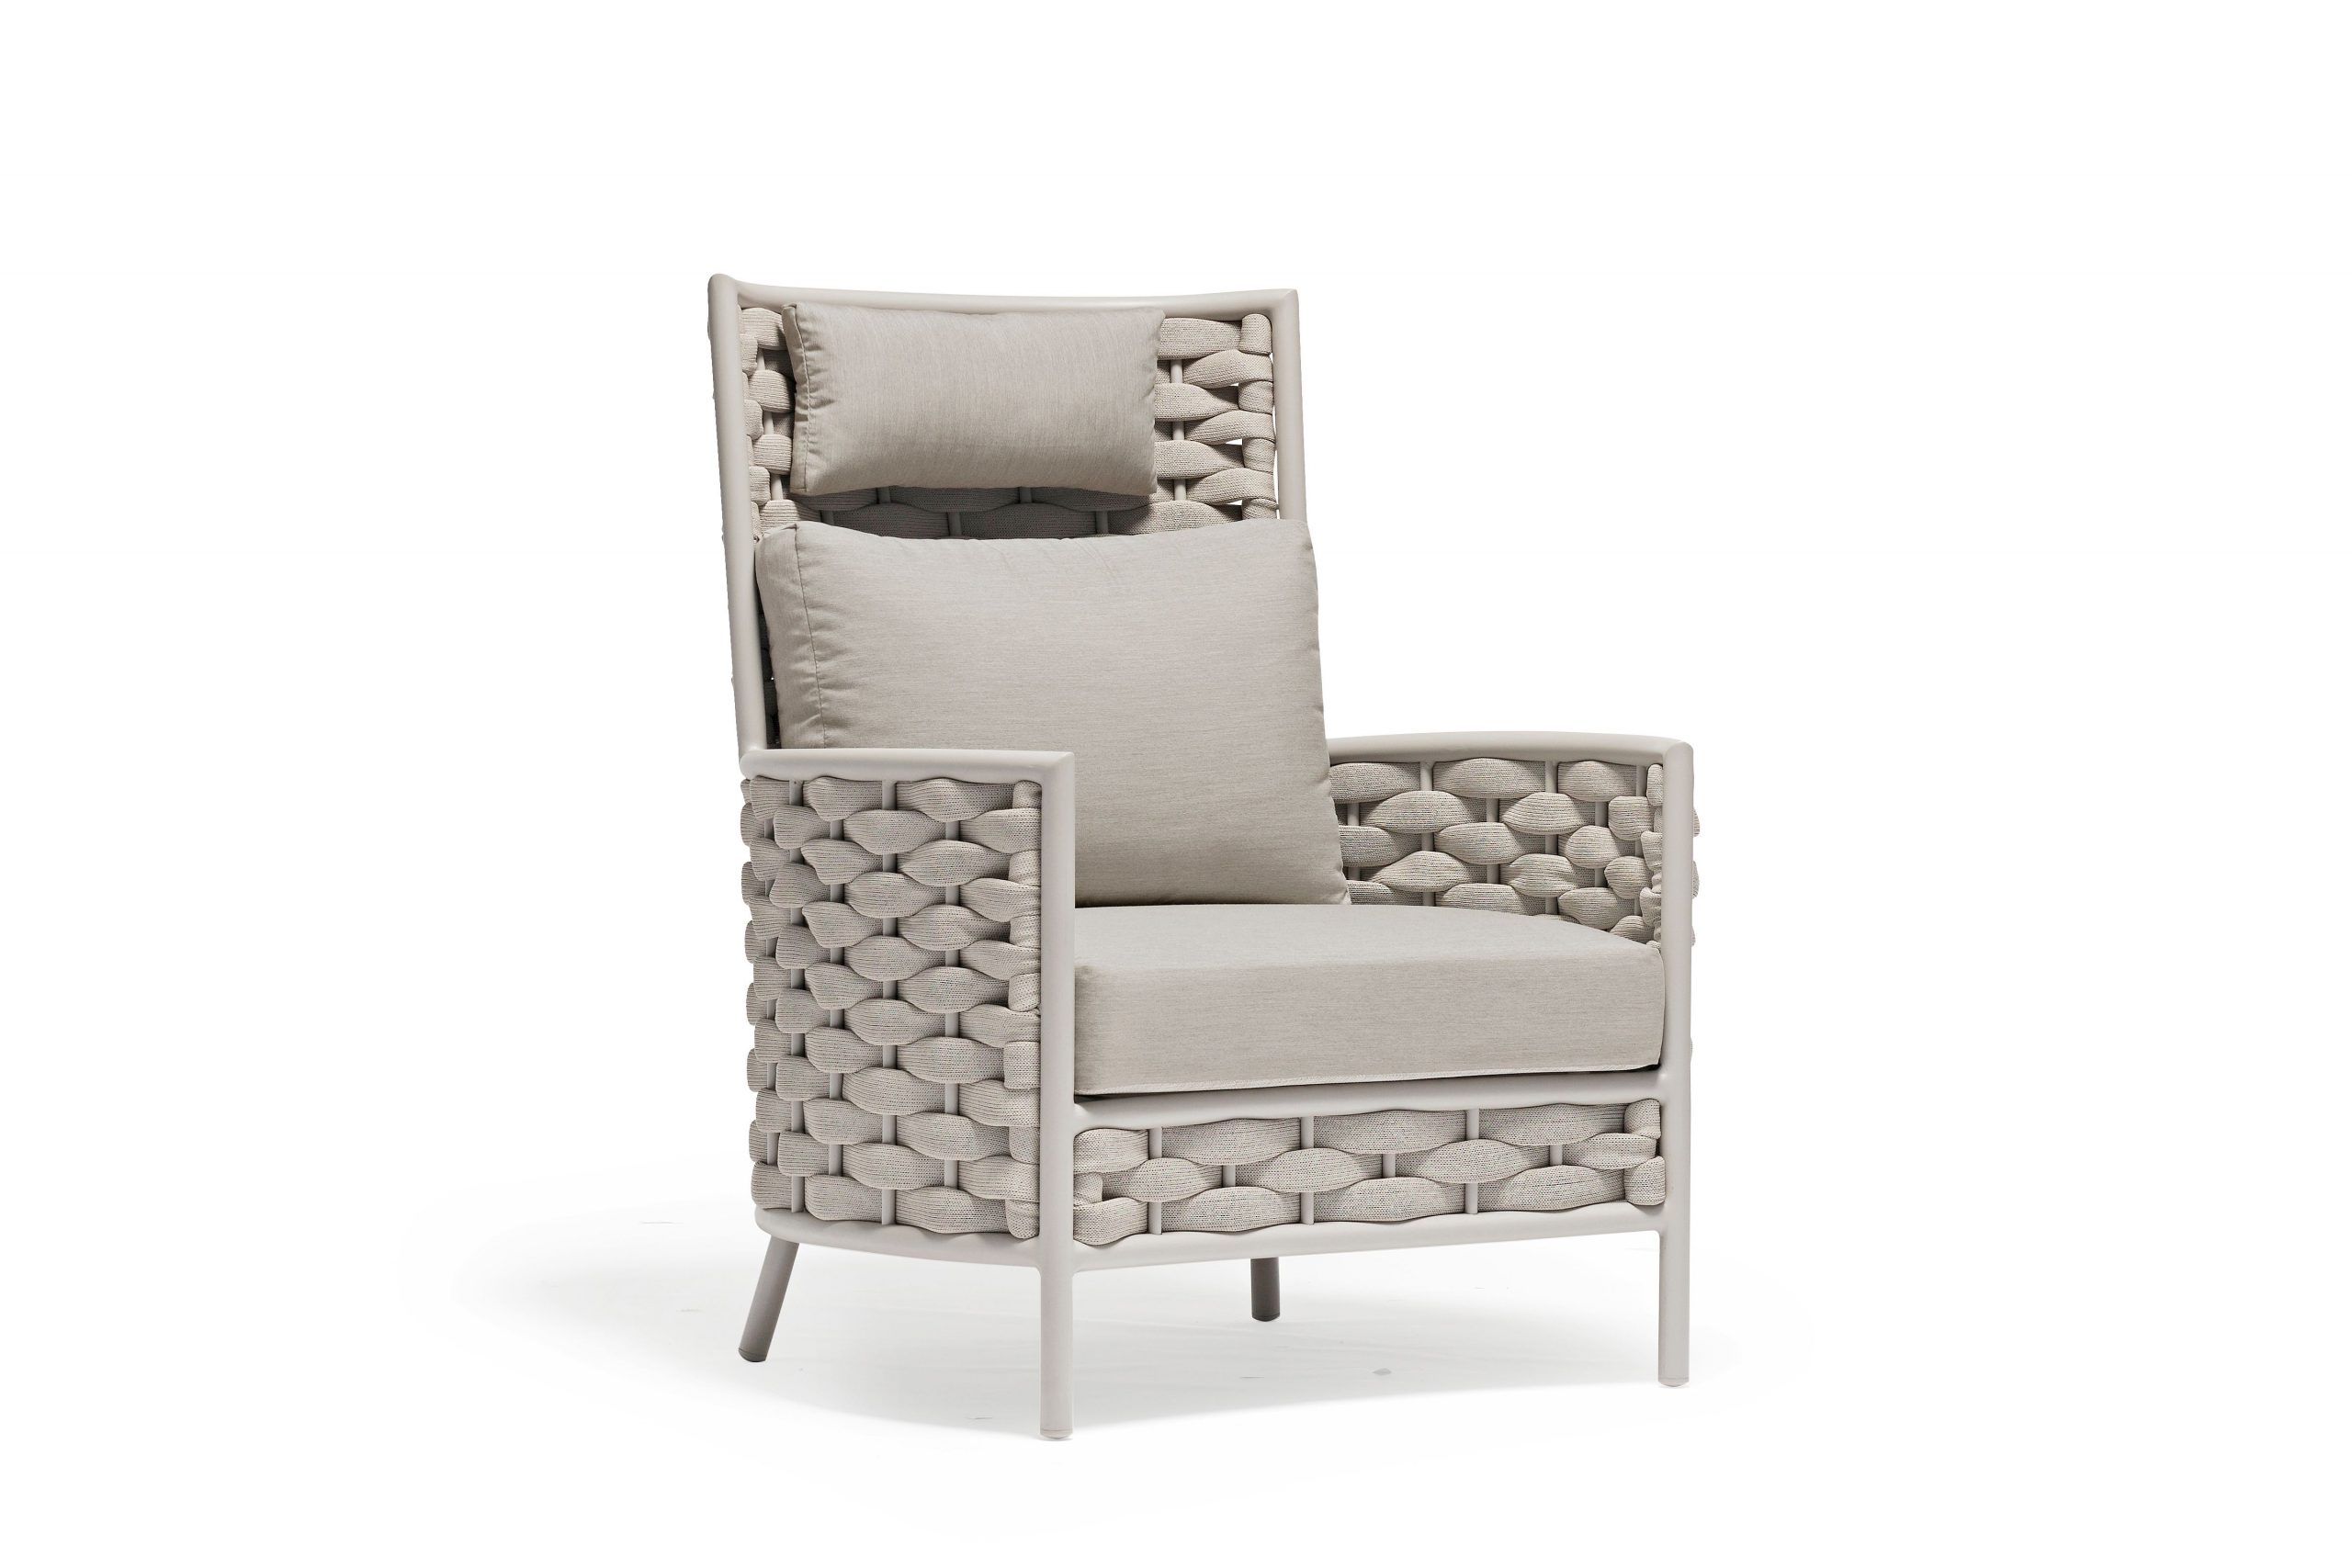 COUTURE LOOP HIGH BACK CHAIR